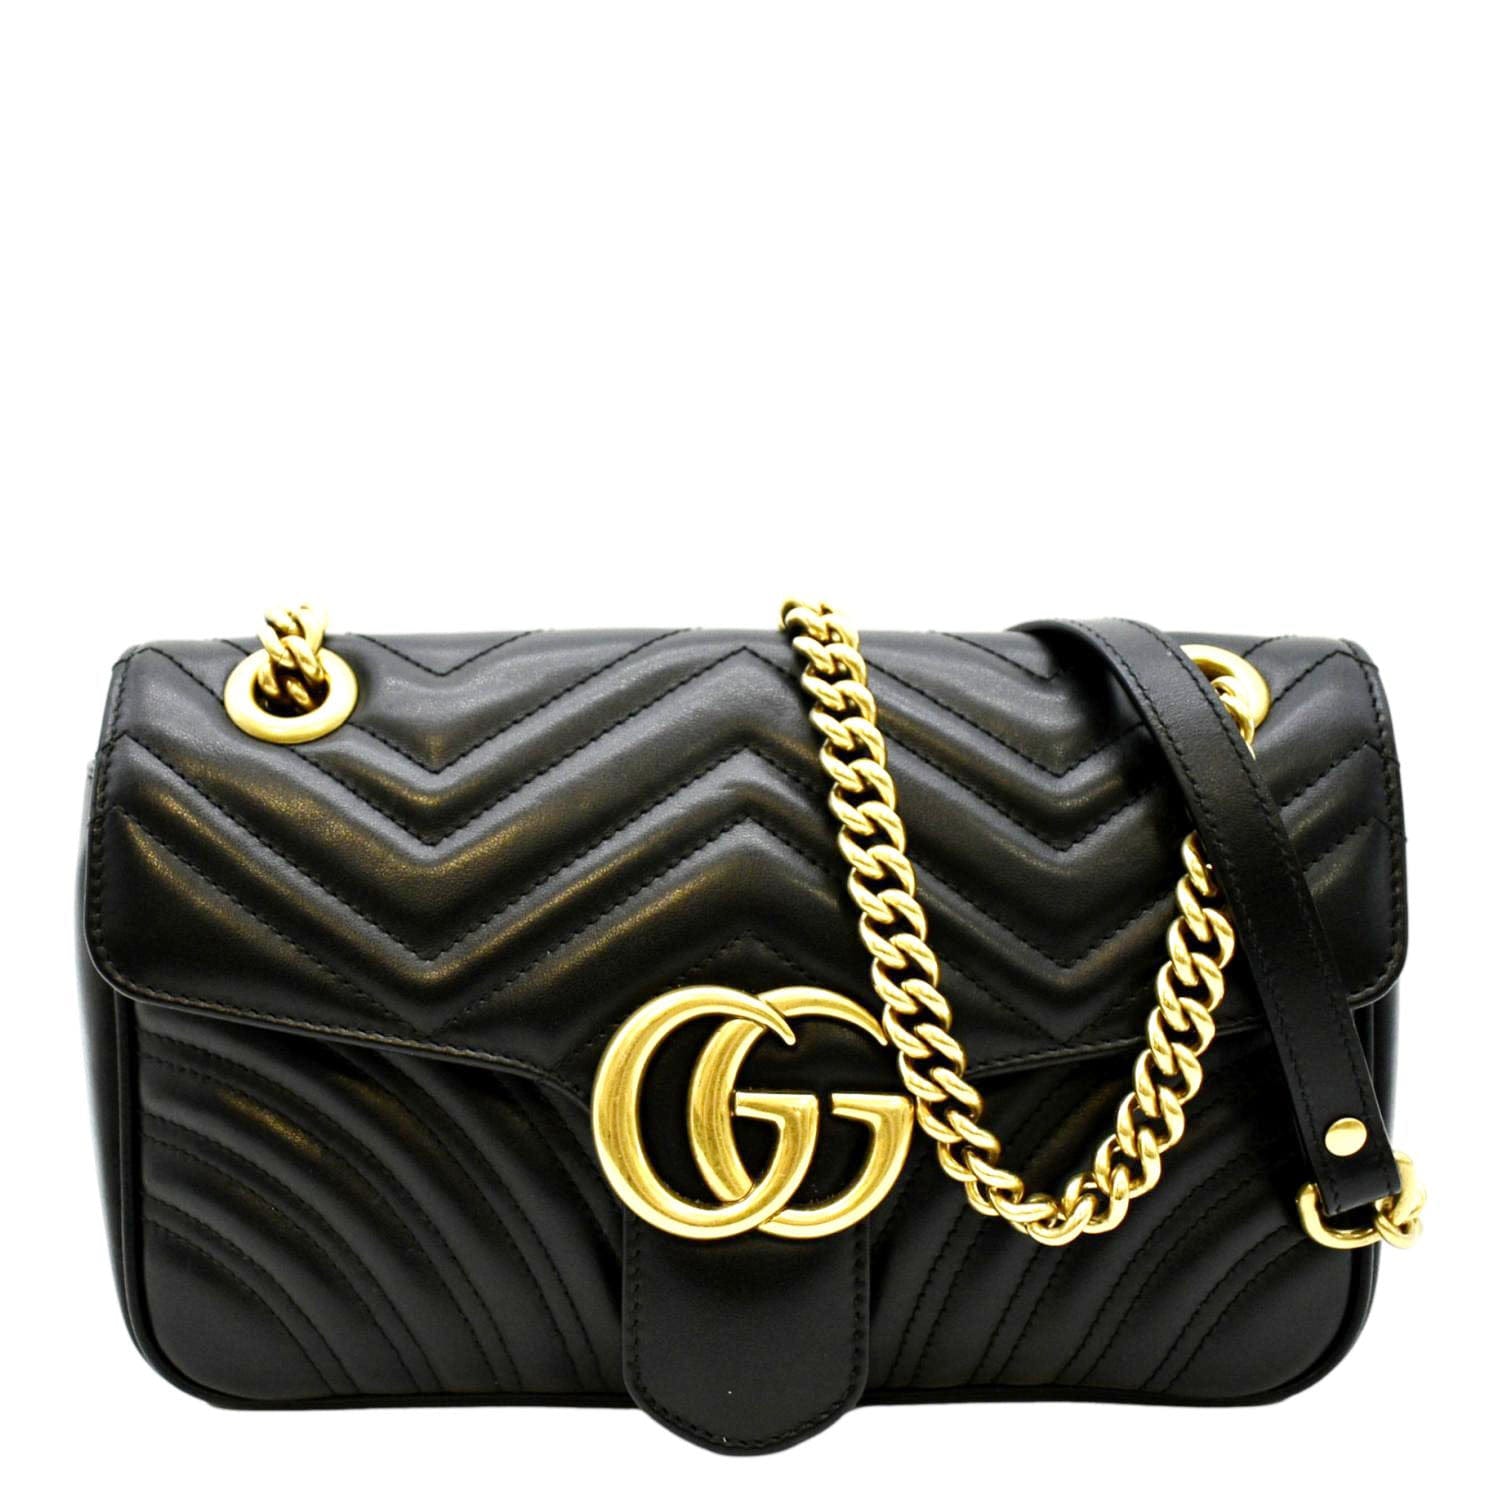 Gucci Marmont Bags & Handbags for Women, Authenticity Guaranteed